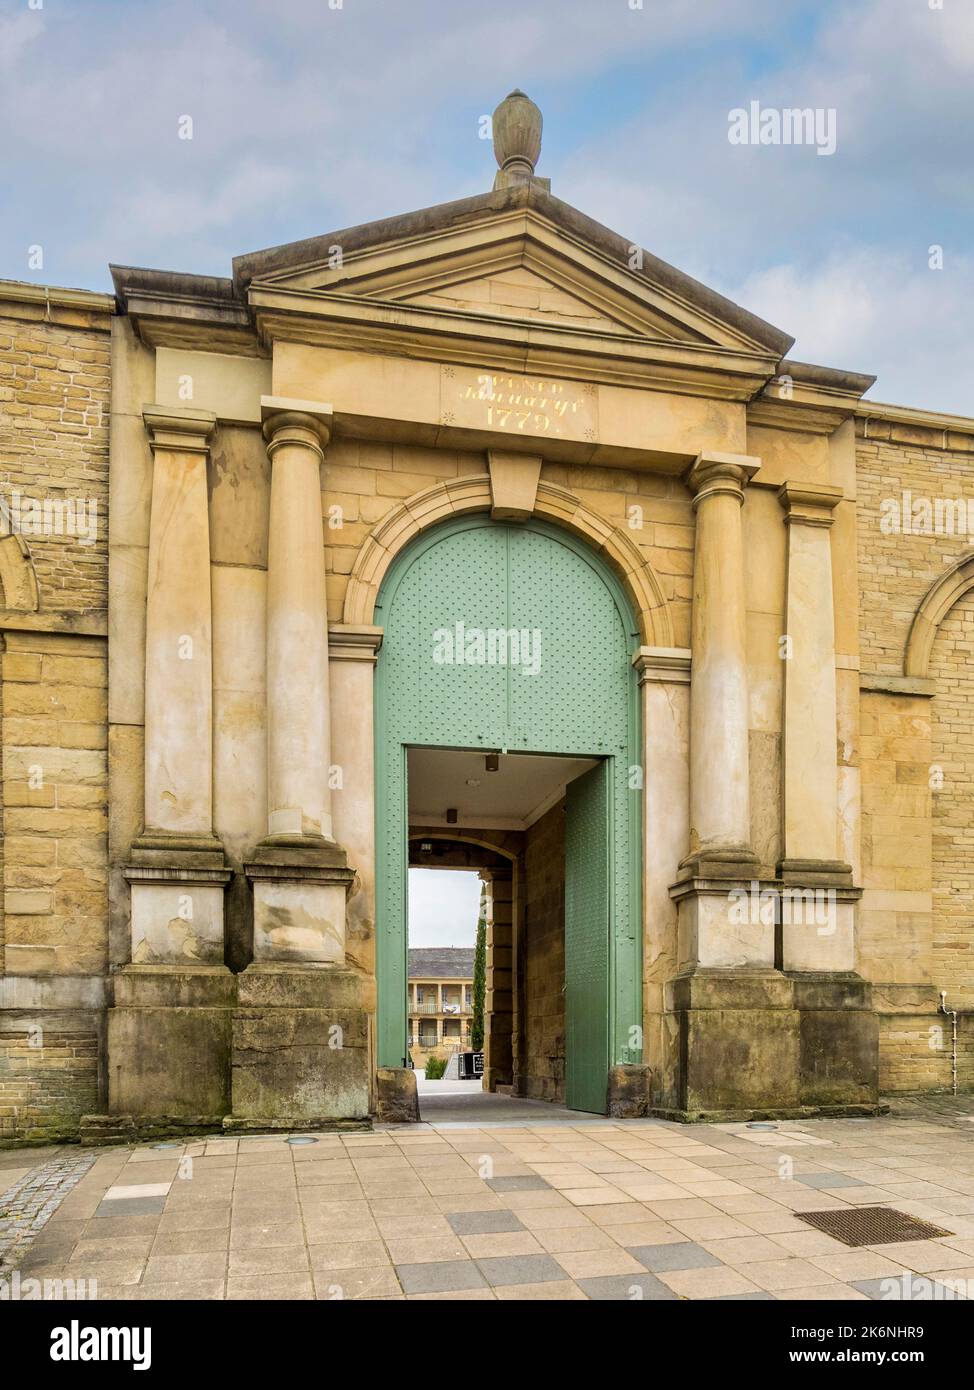 28 April 2022: Halifax, West Yorkshire, UK - The North gate of the Piece Hall, opened in 1779 as a marketplace for local weavers, and a Grade I Listed Stock Photo